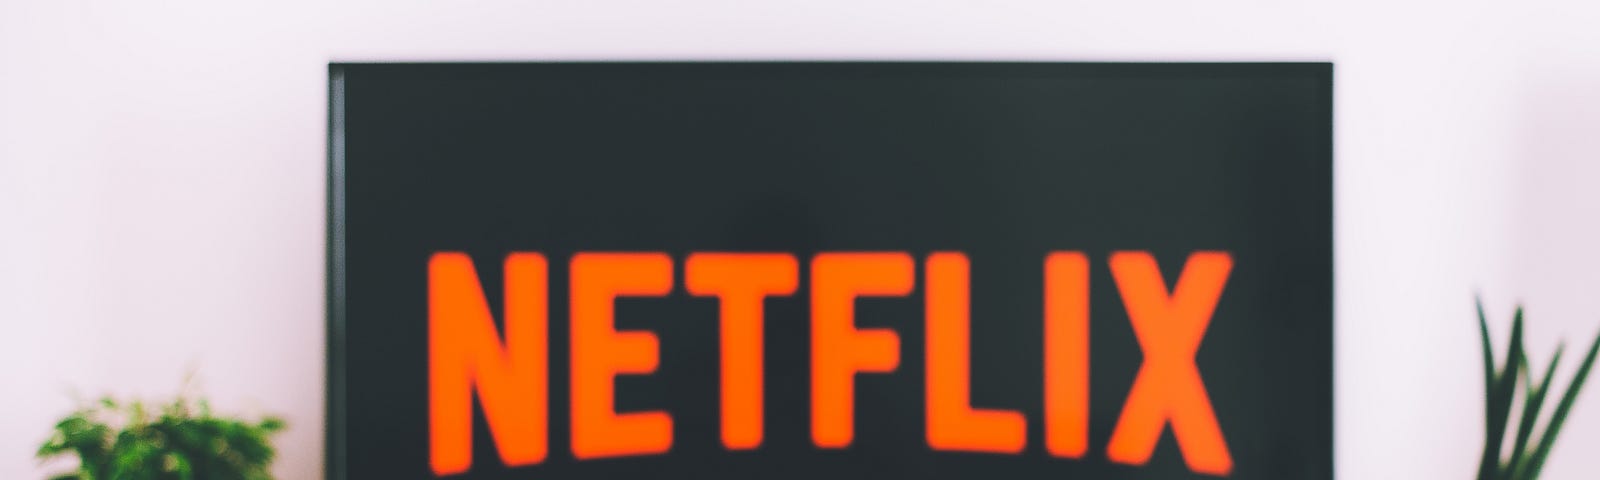 Netflix logo on a television screen with a potted plant on either side. A hand pointing a remote at the screen in front